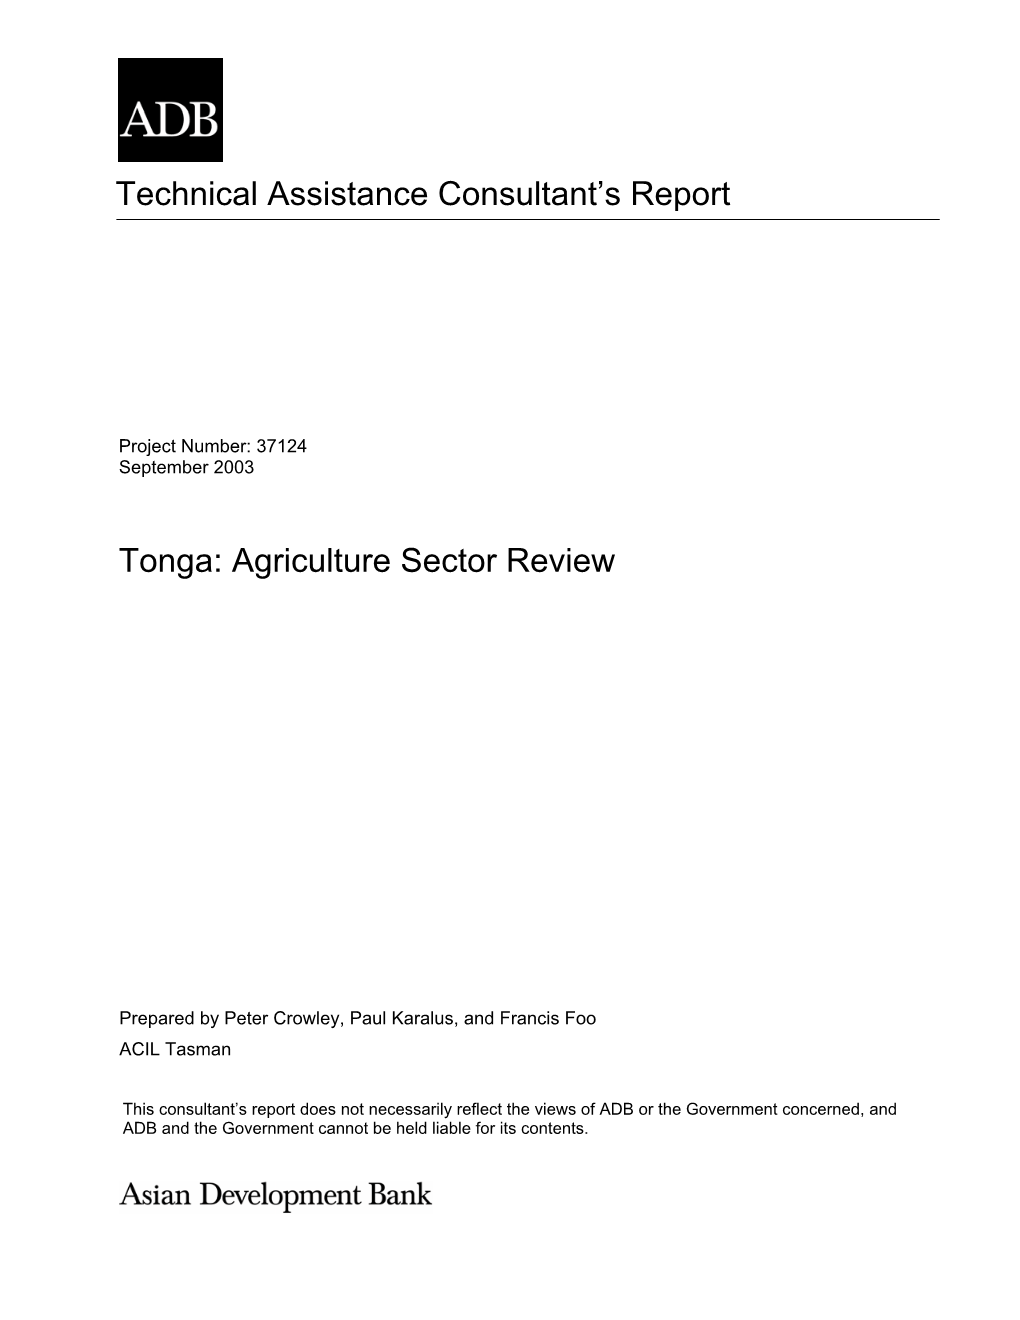 Agriculture Sector Review